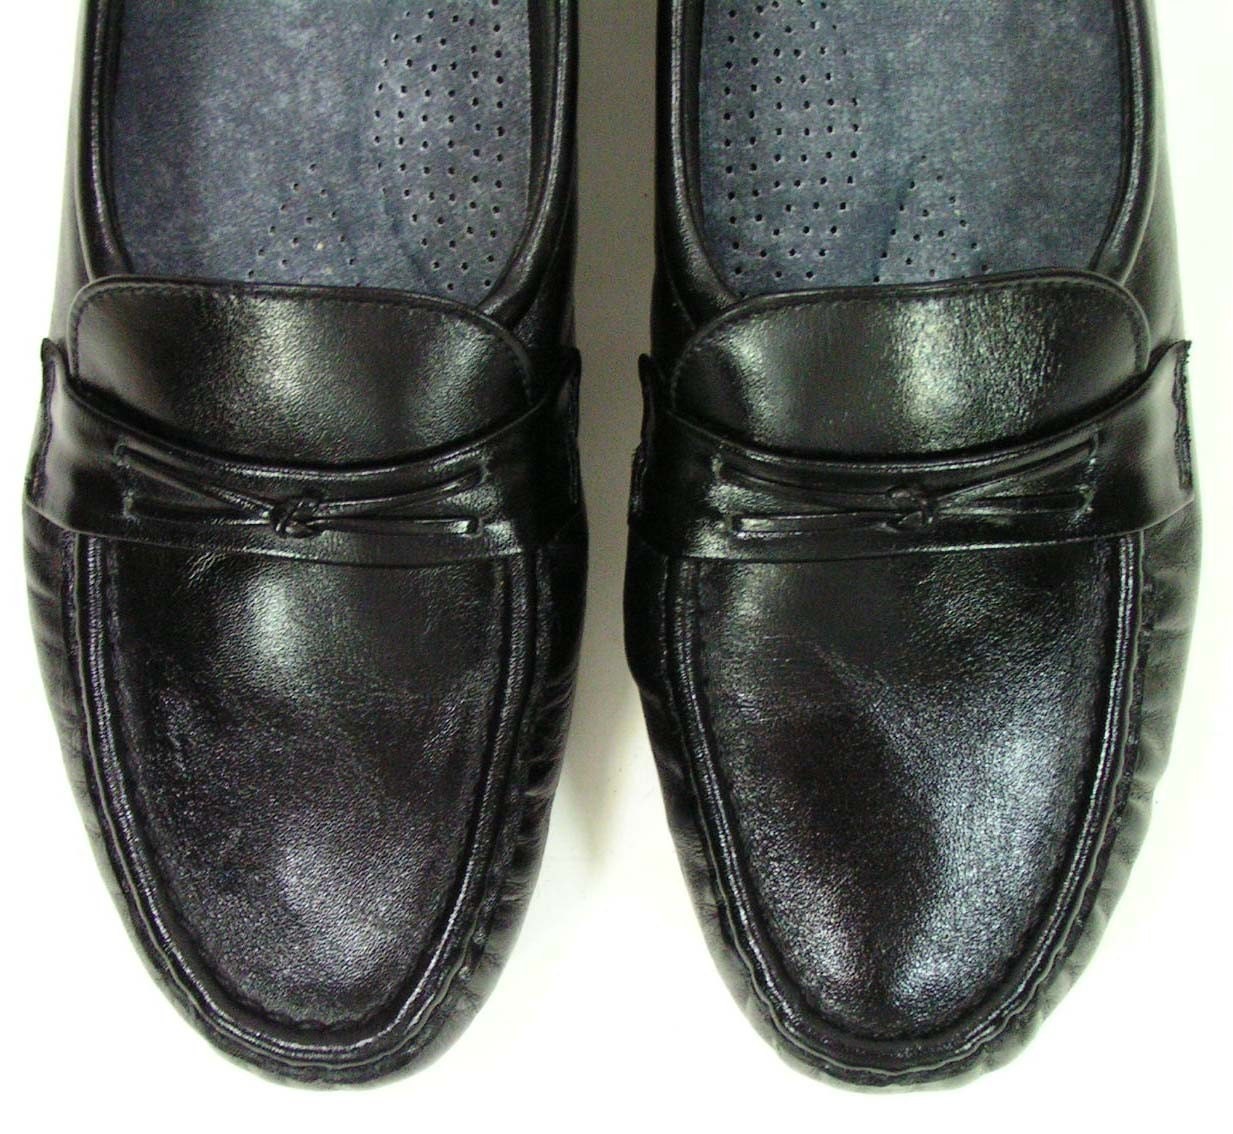 sas shoes womens 8.5 b m black loafers granny heeled leather